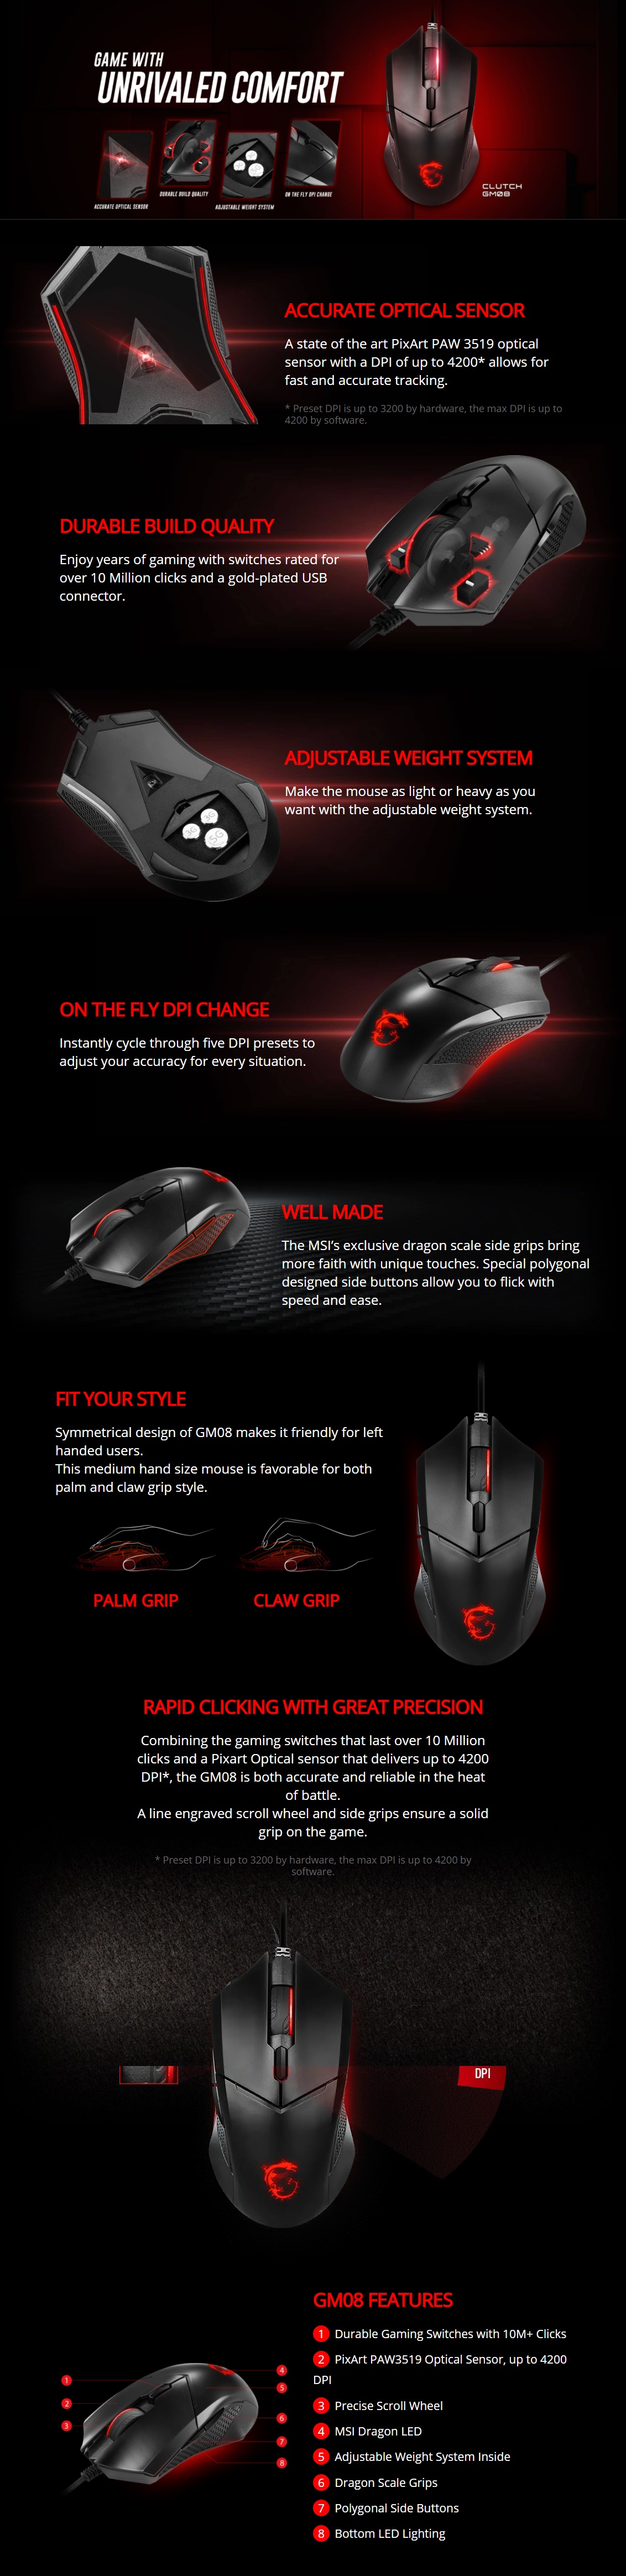 A large marketing image providing additional information about the product MSI Clutch GM08 Gaming Mouse - Additional alt info not provided